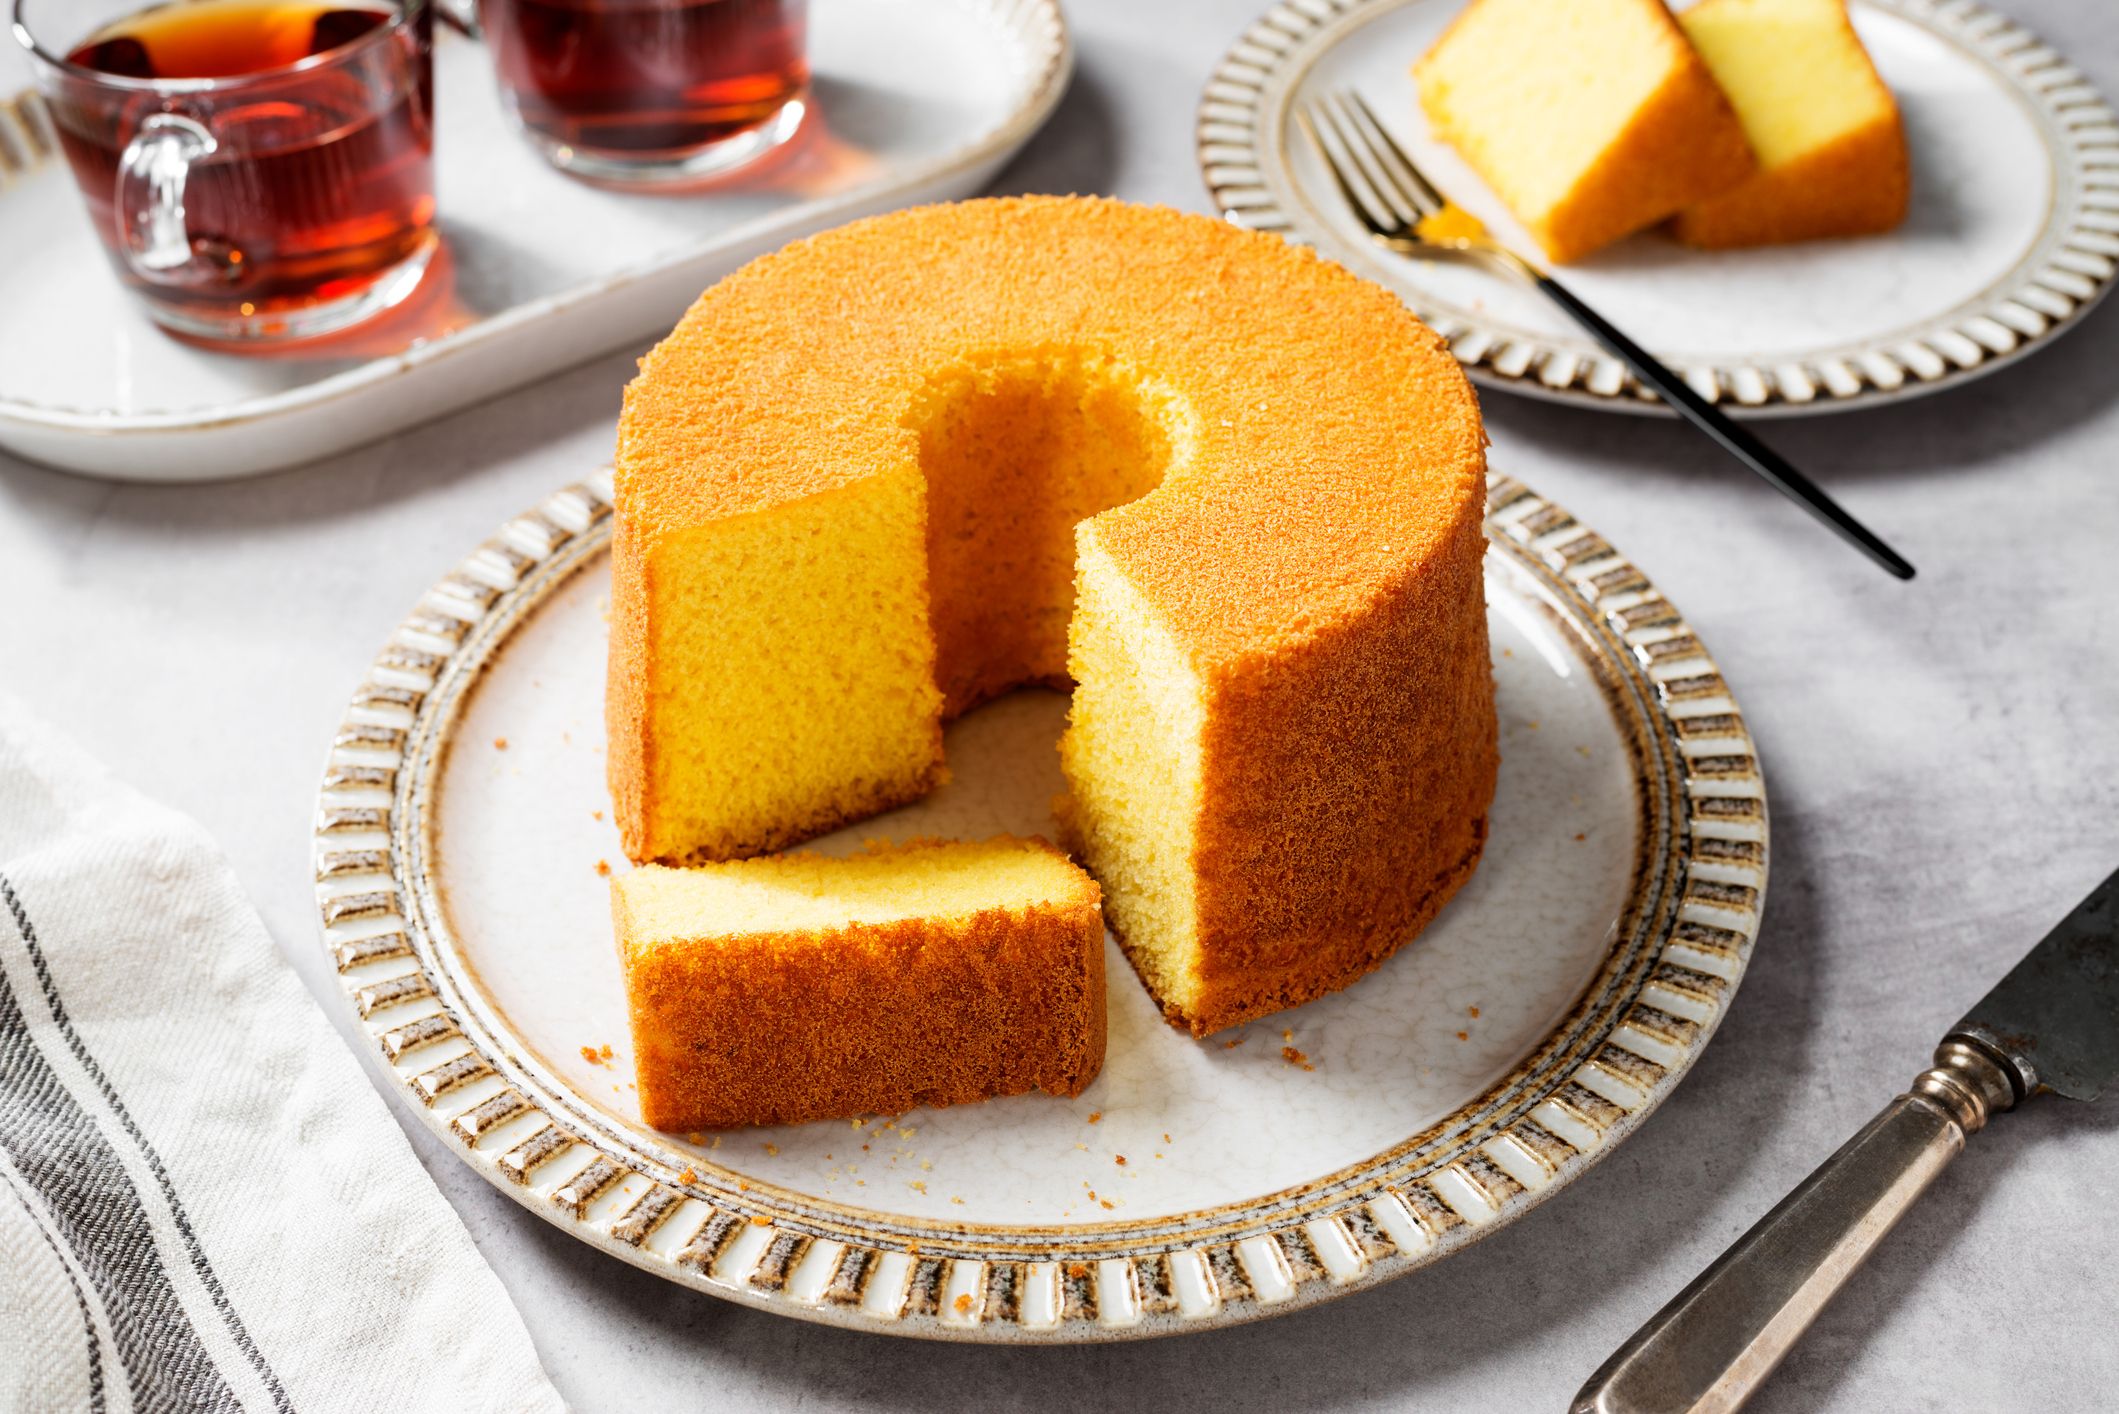 The Best Way To Make Pound Cake from Scratch